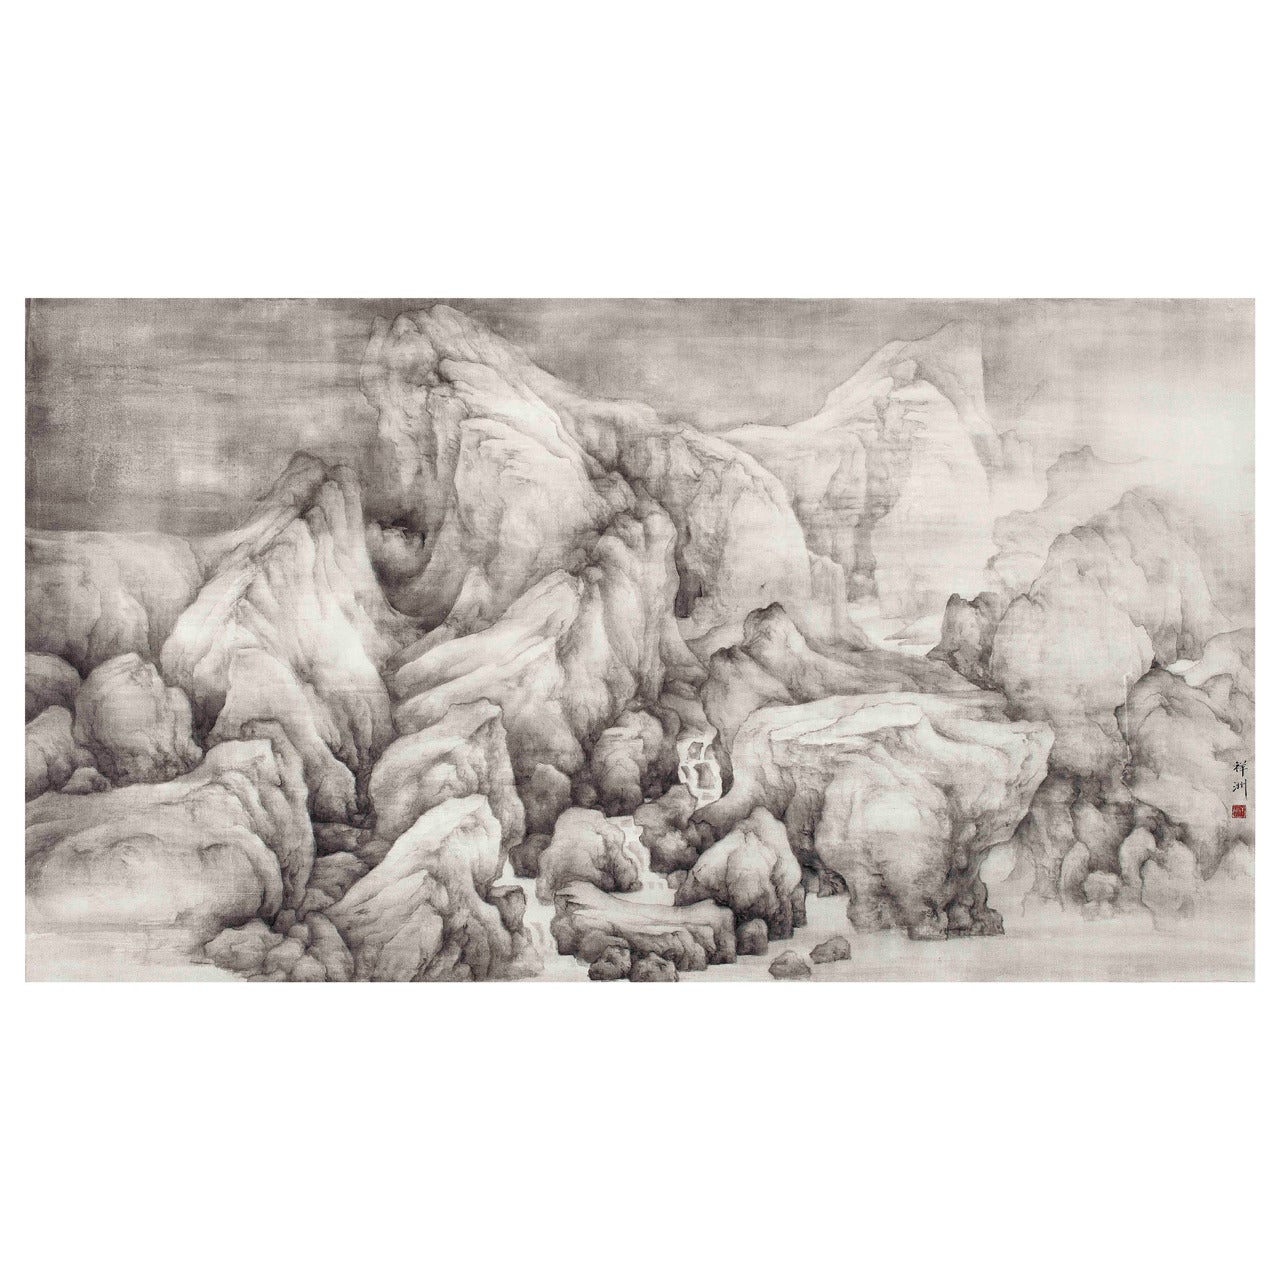 Stream and Mountain Accumulating Gems by Tai Xiangzhou, Ink on Silk, 溪山积玉